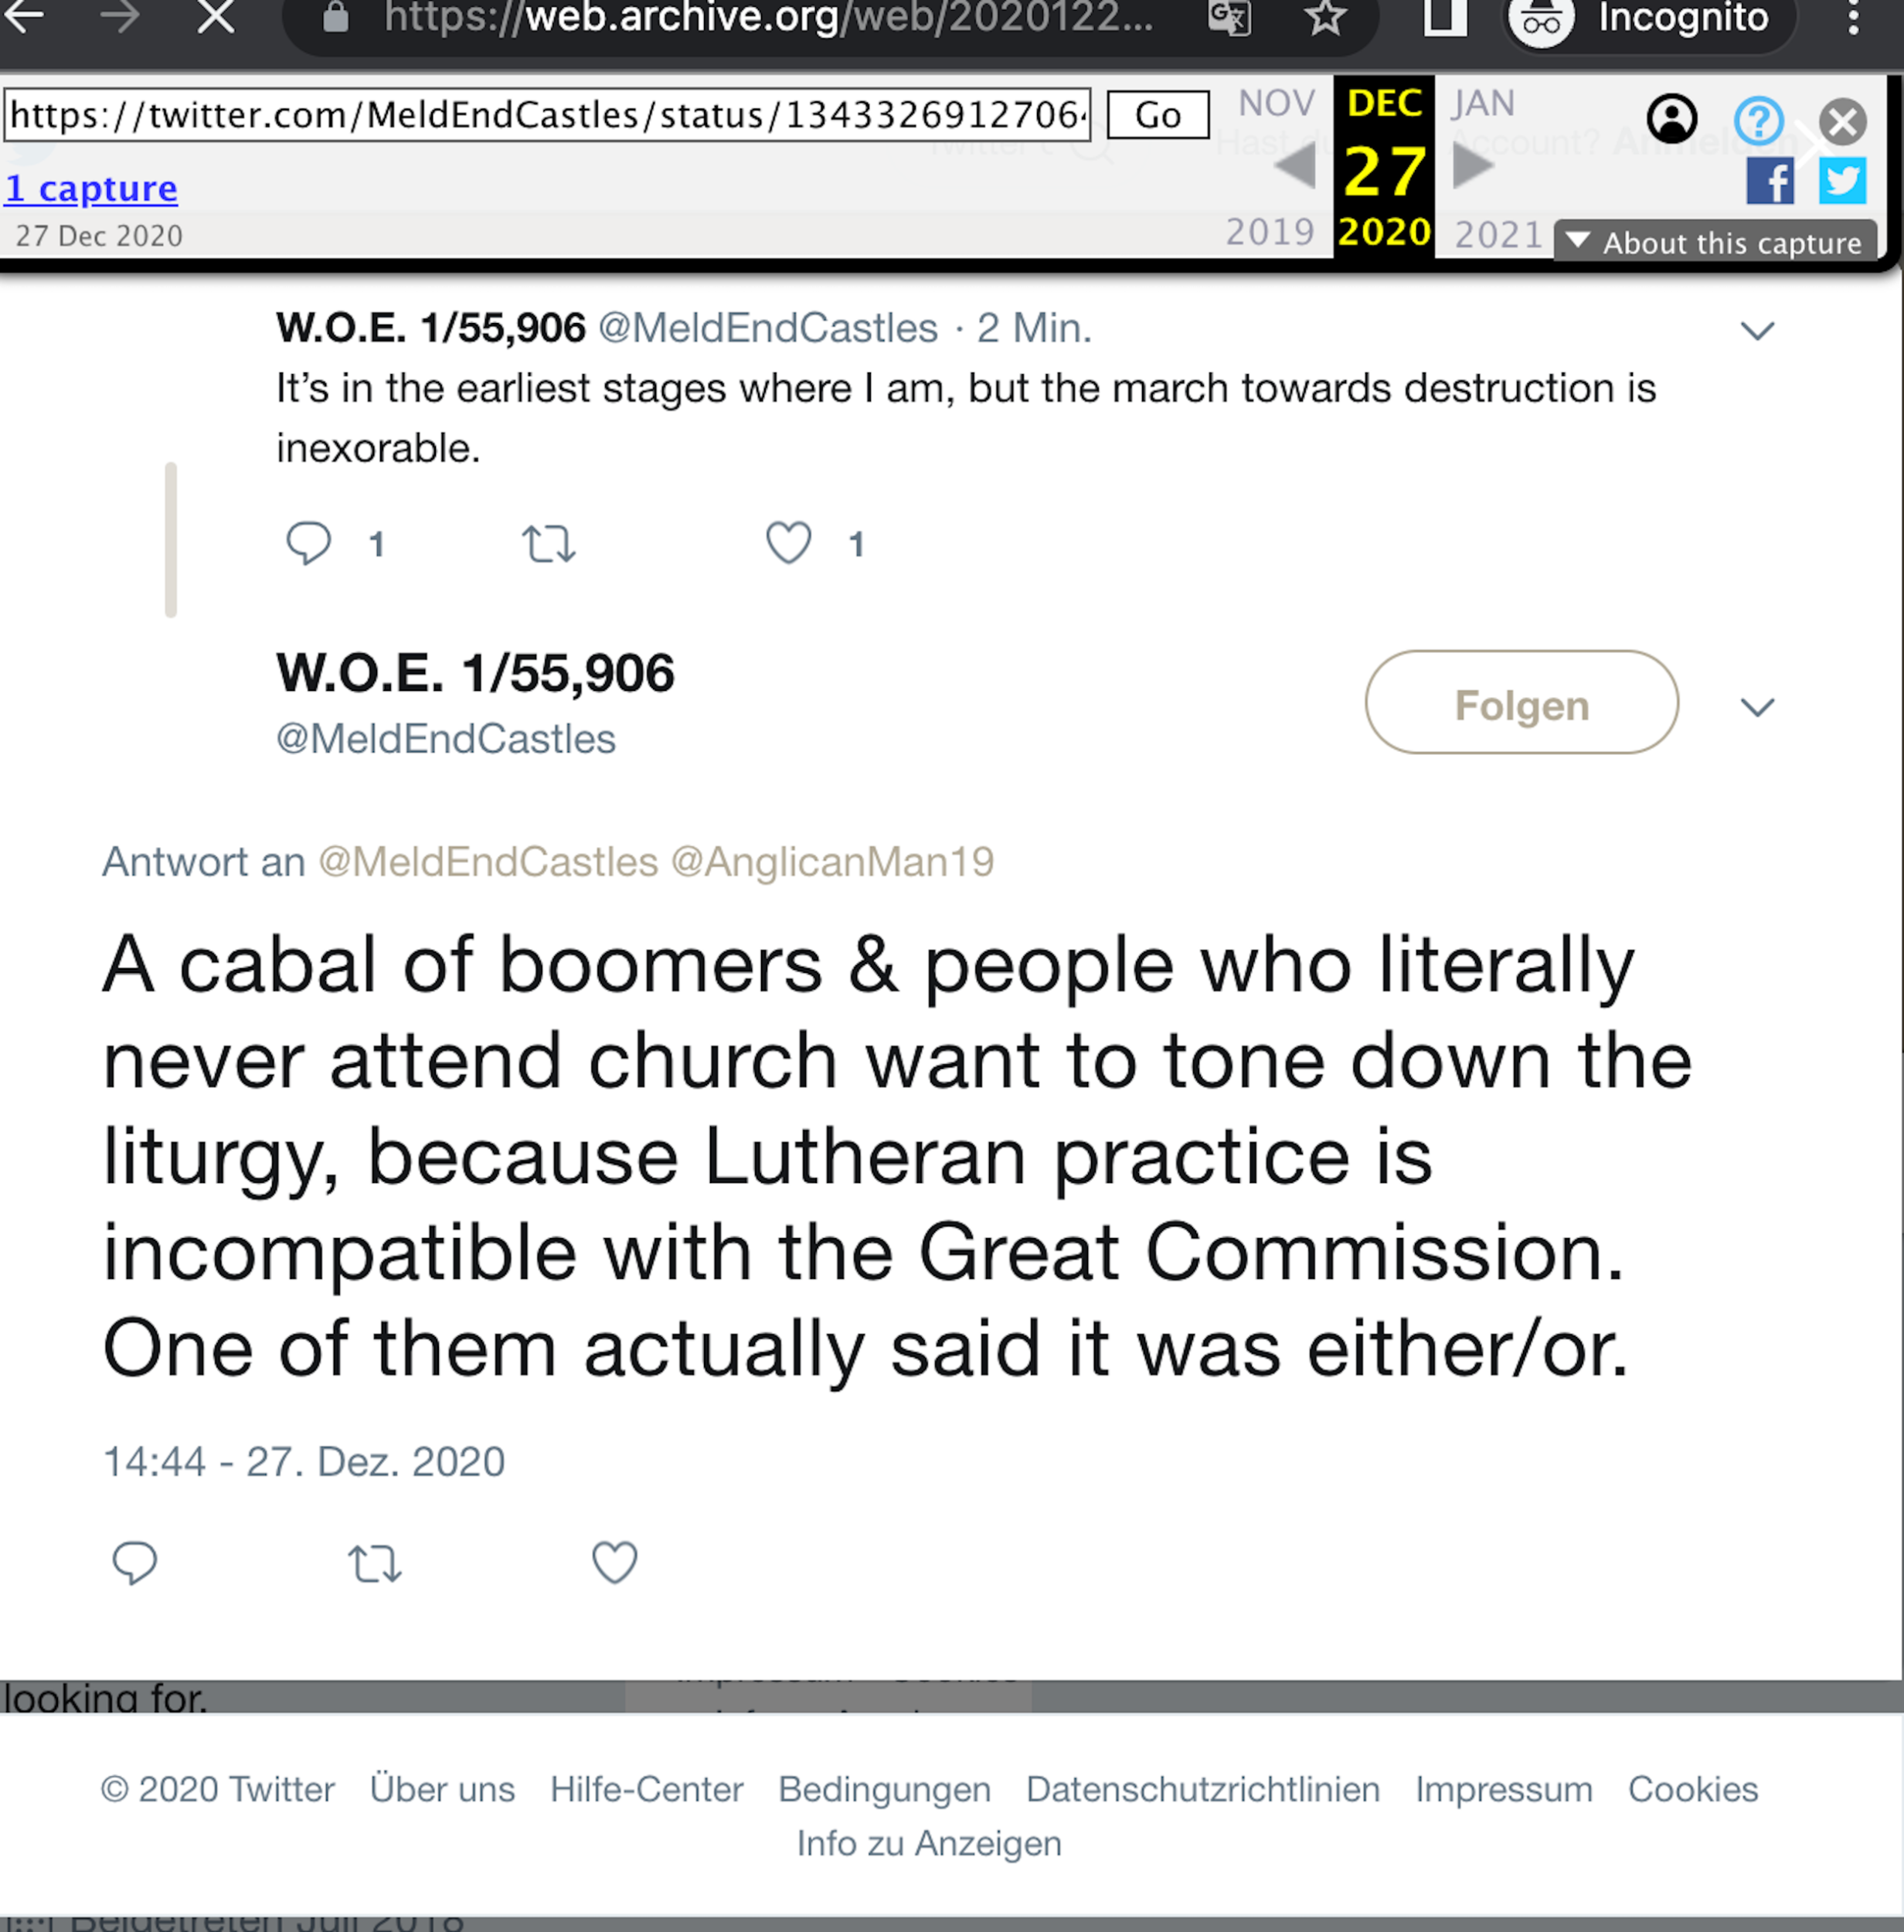 WOE as Meldendcastles: "A cabal of boomers and people who literally never attend church want to tone down the liturgy, because Lutheran practice is incompatible with the Great Commission. One of them actually said it was either/or."